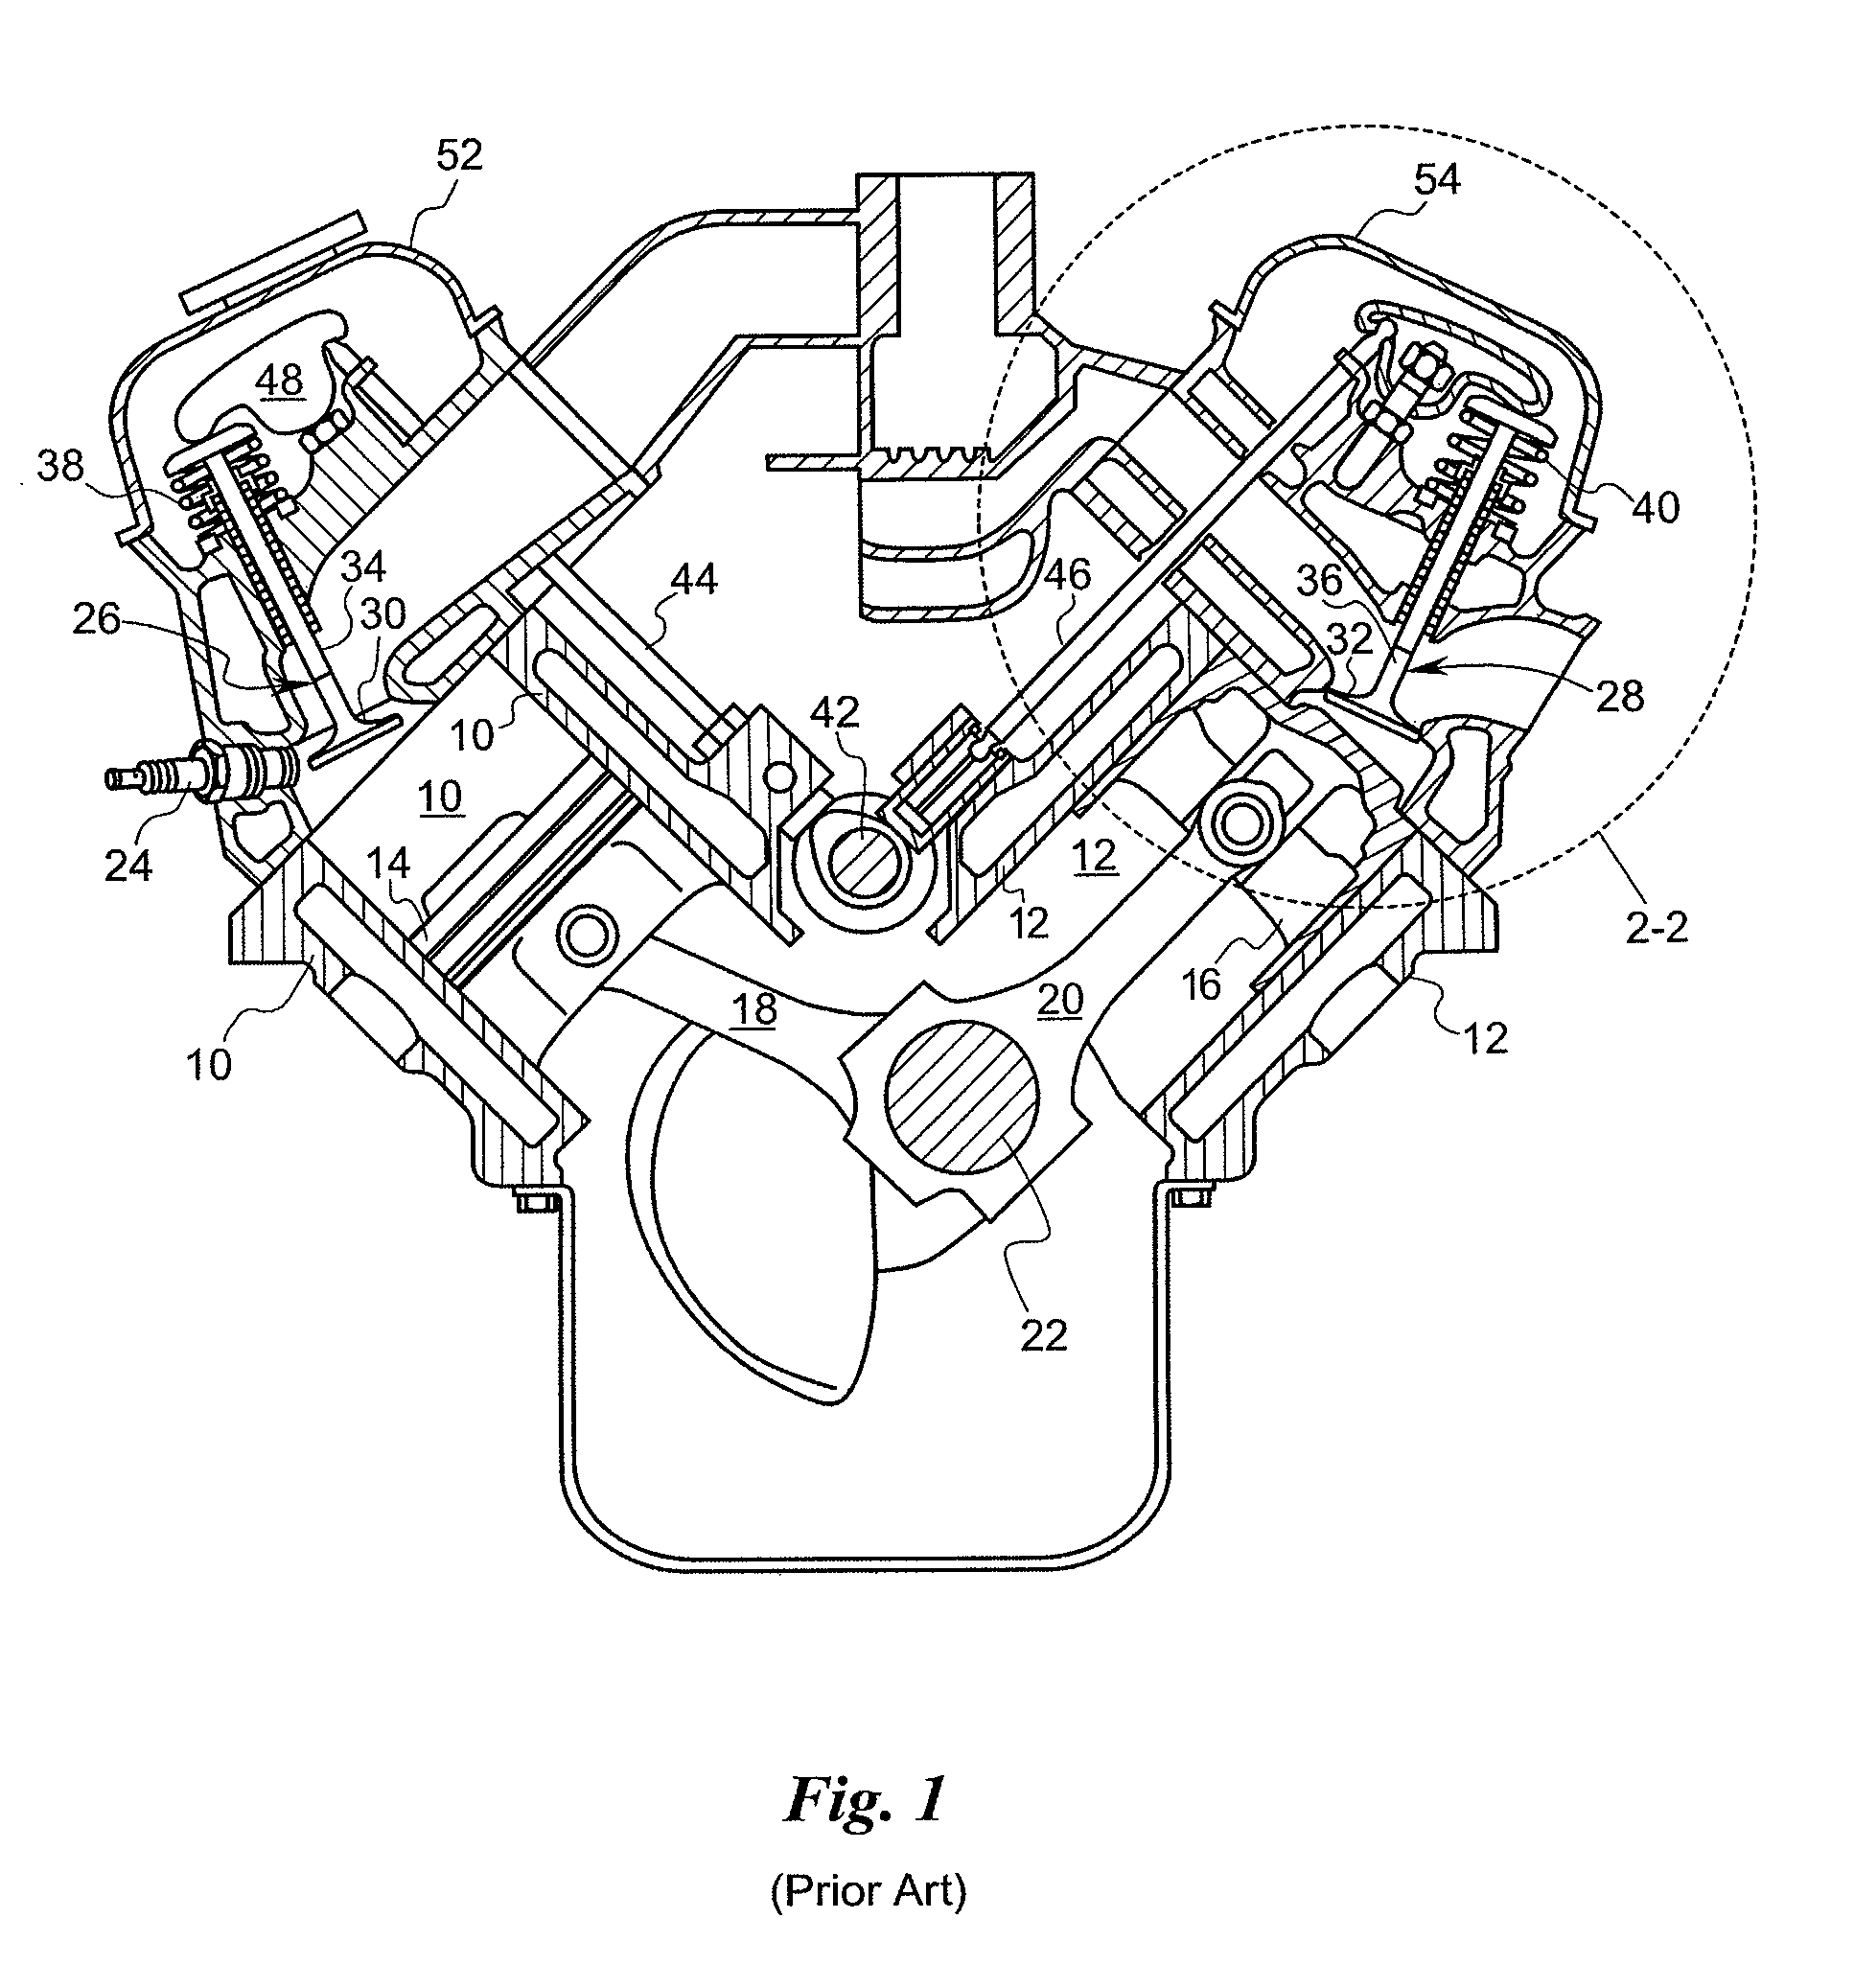 Valve cover housing for internal combustion engines